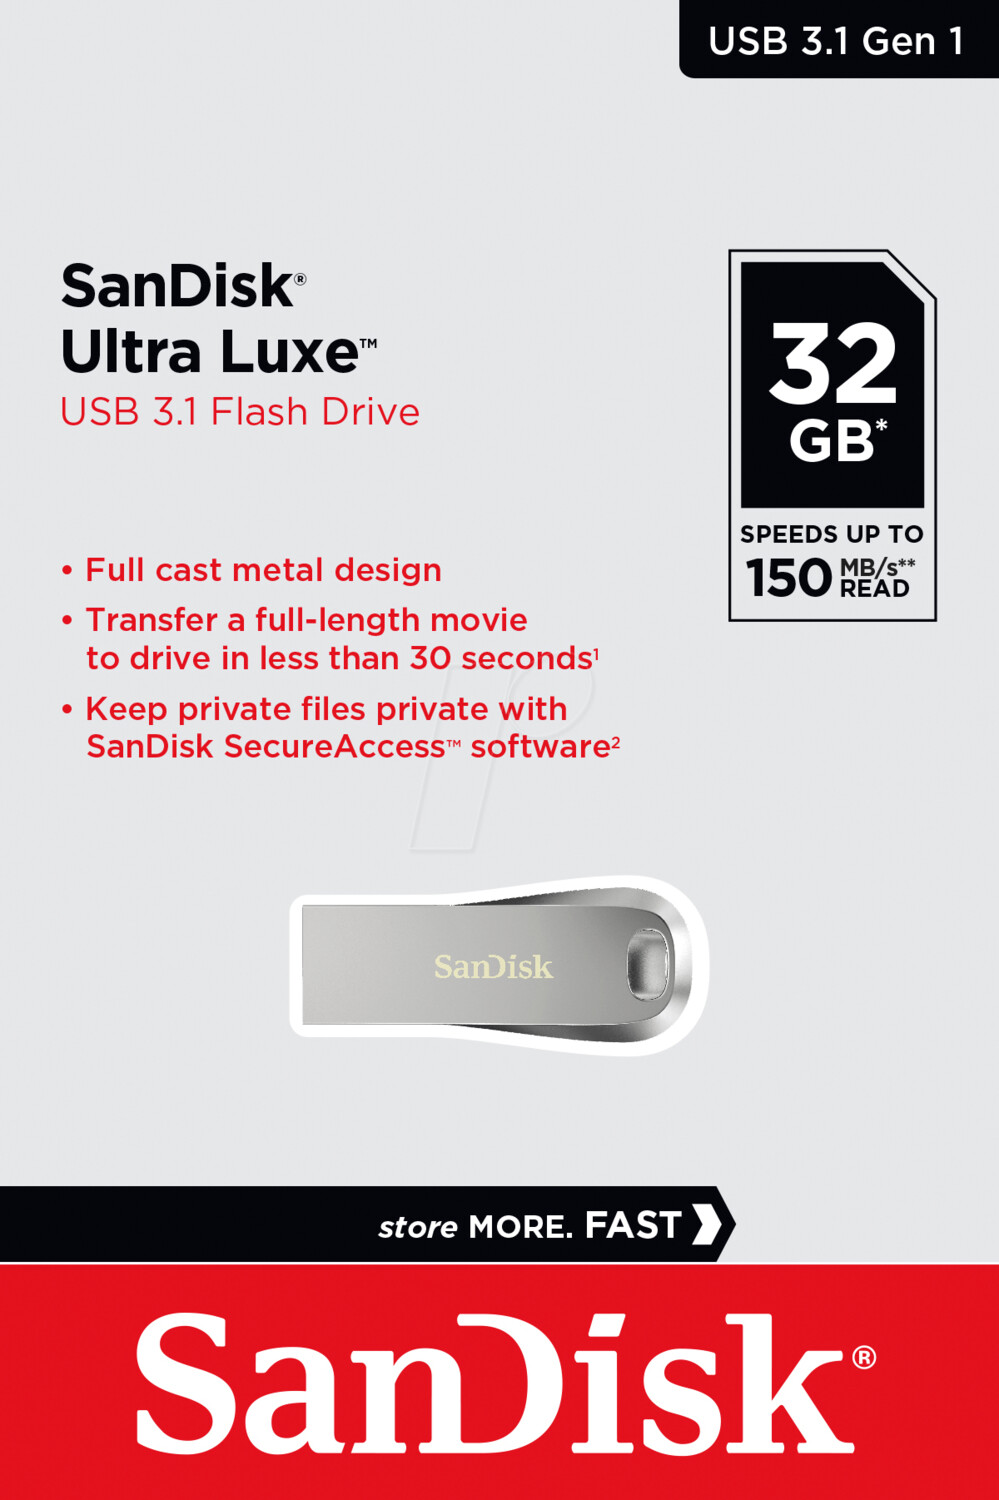 SanDisk Ultra Luxe 150Mbps USB 3.1 Flash Drive, Storage: 32GB